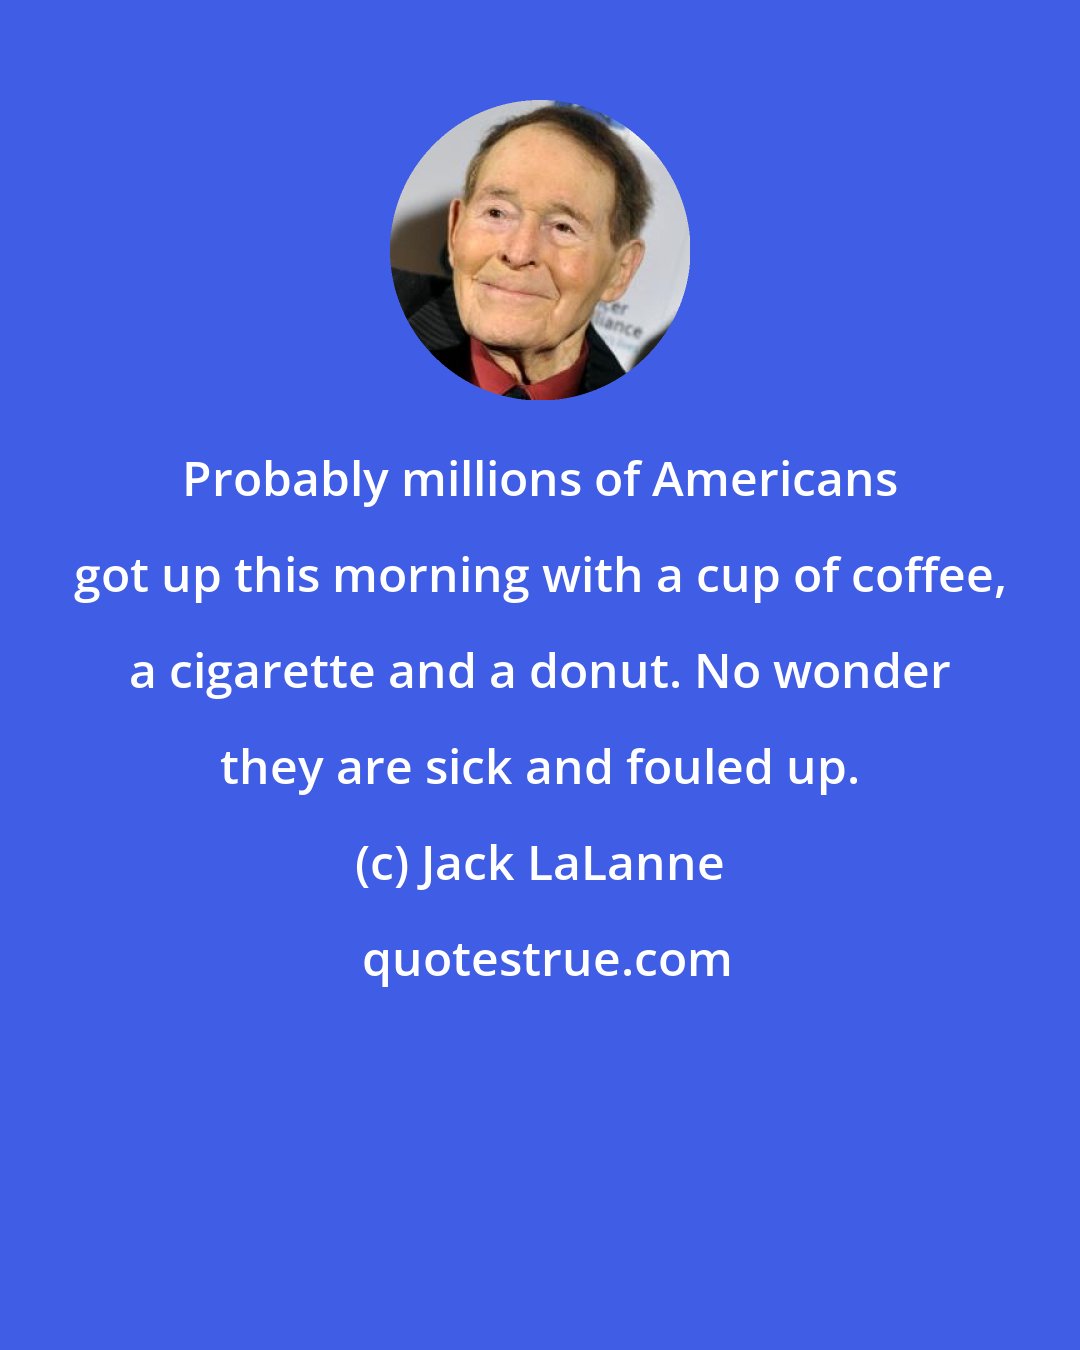 Jack LaLanne: Probably millions of Americans got up this morning with a cup of coffee, a cigarette and a donut. No wonder they are sick and fouled up.